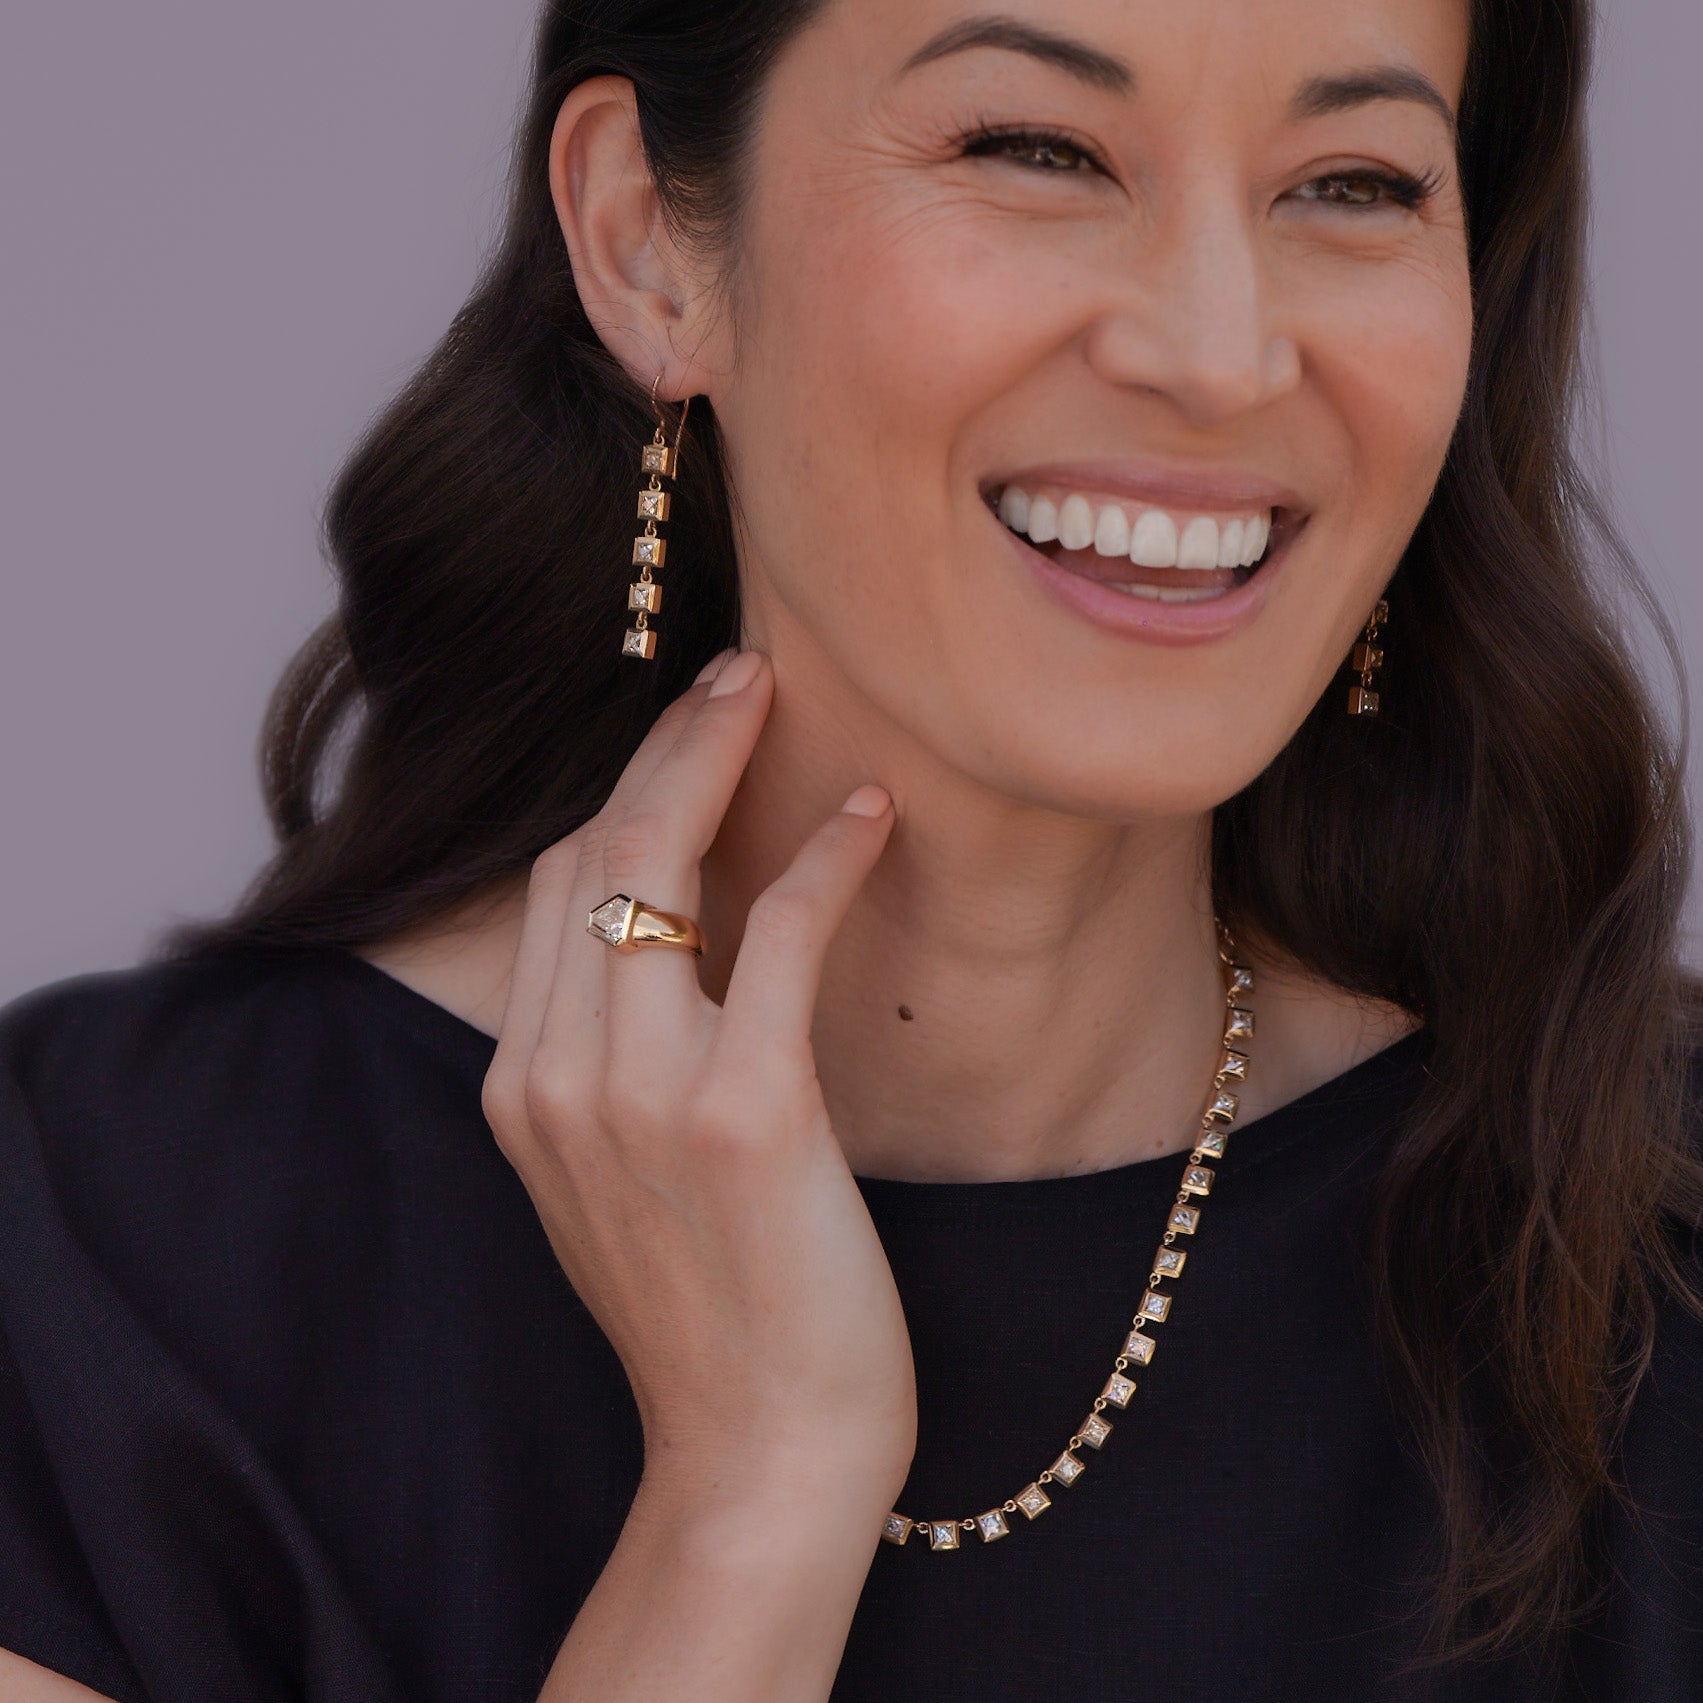 Woman wearing earring, ring, and necklace from Single Stone's Art Deco-inspired collection, looking slightly off camera and laughing